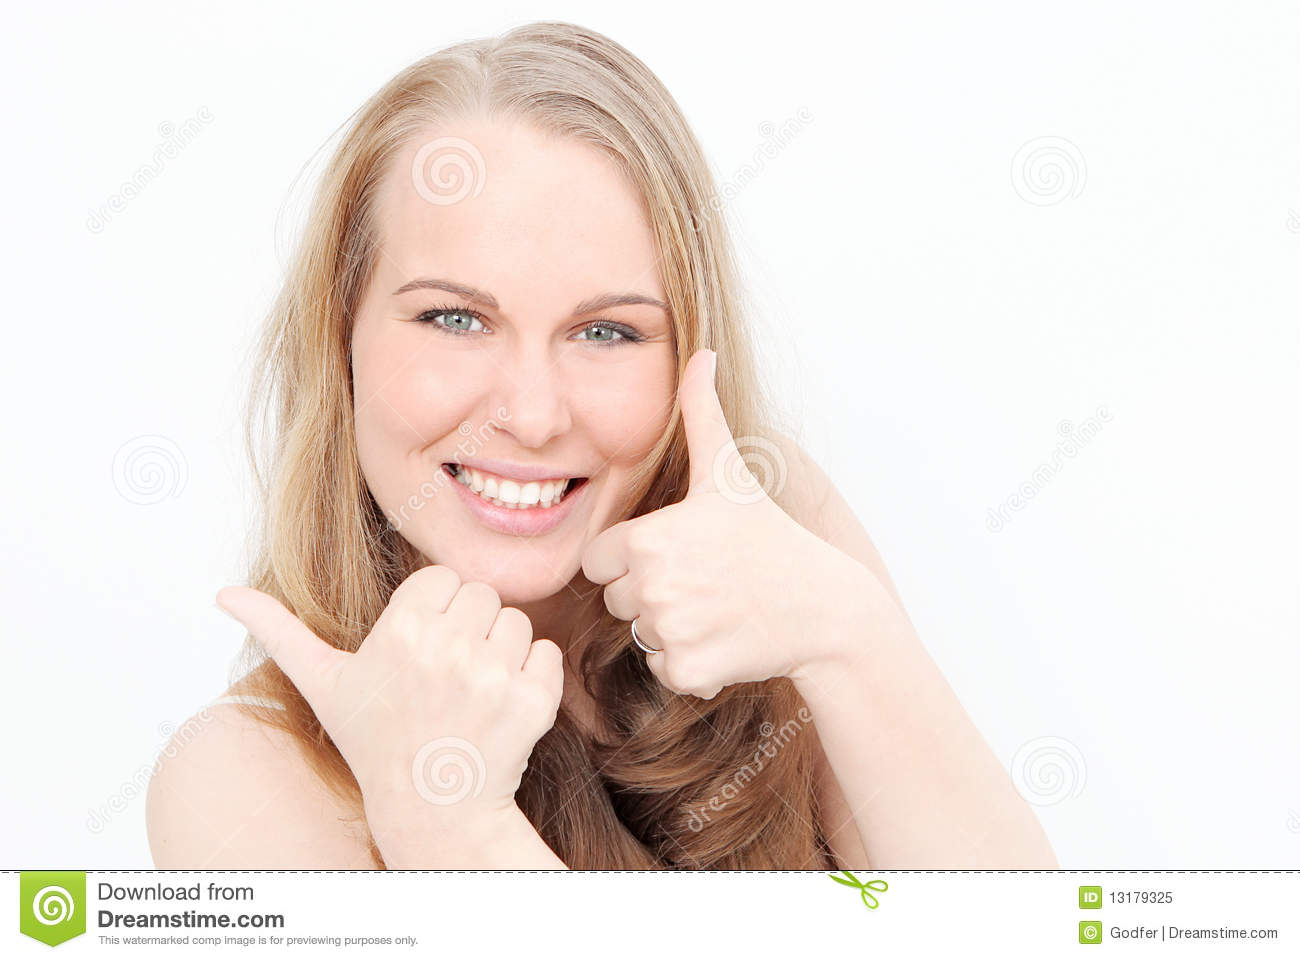 Woman Smiling with Thumbs Up